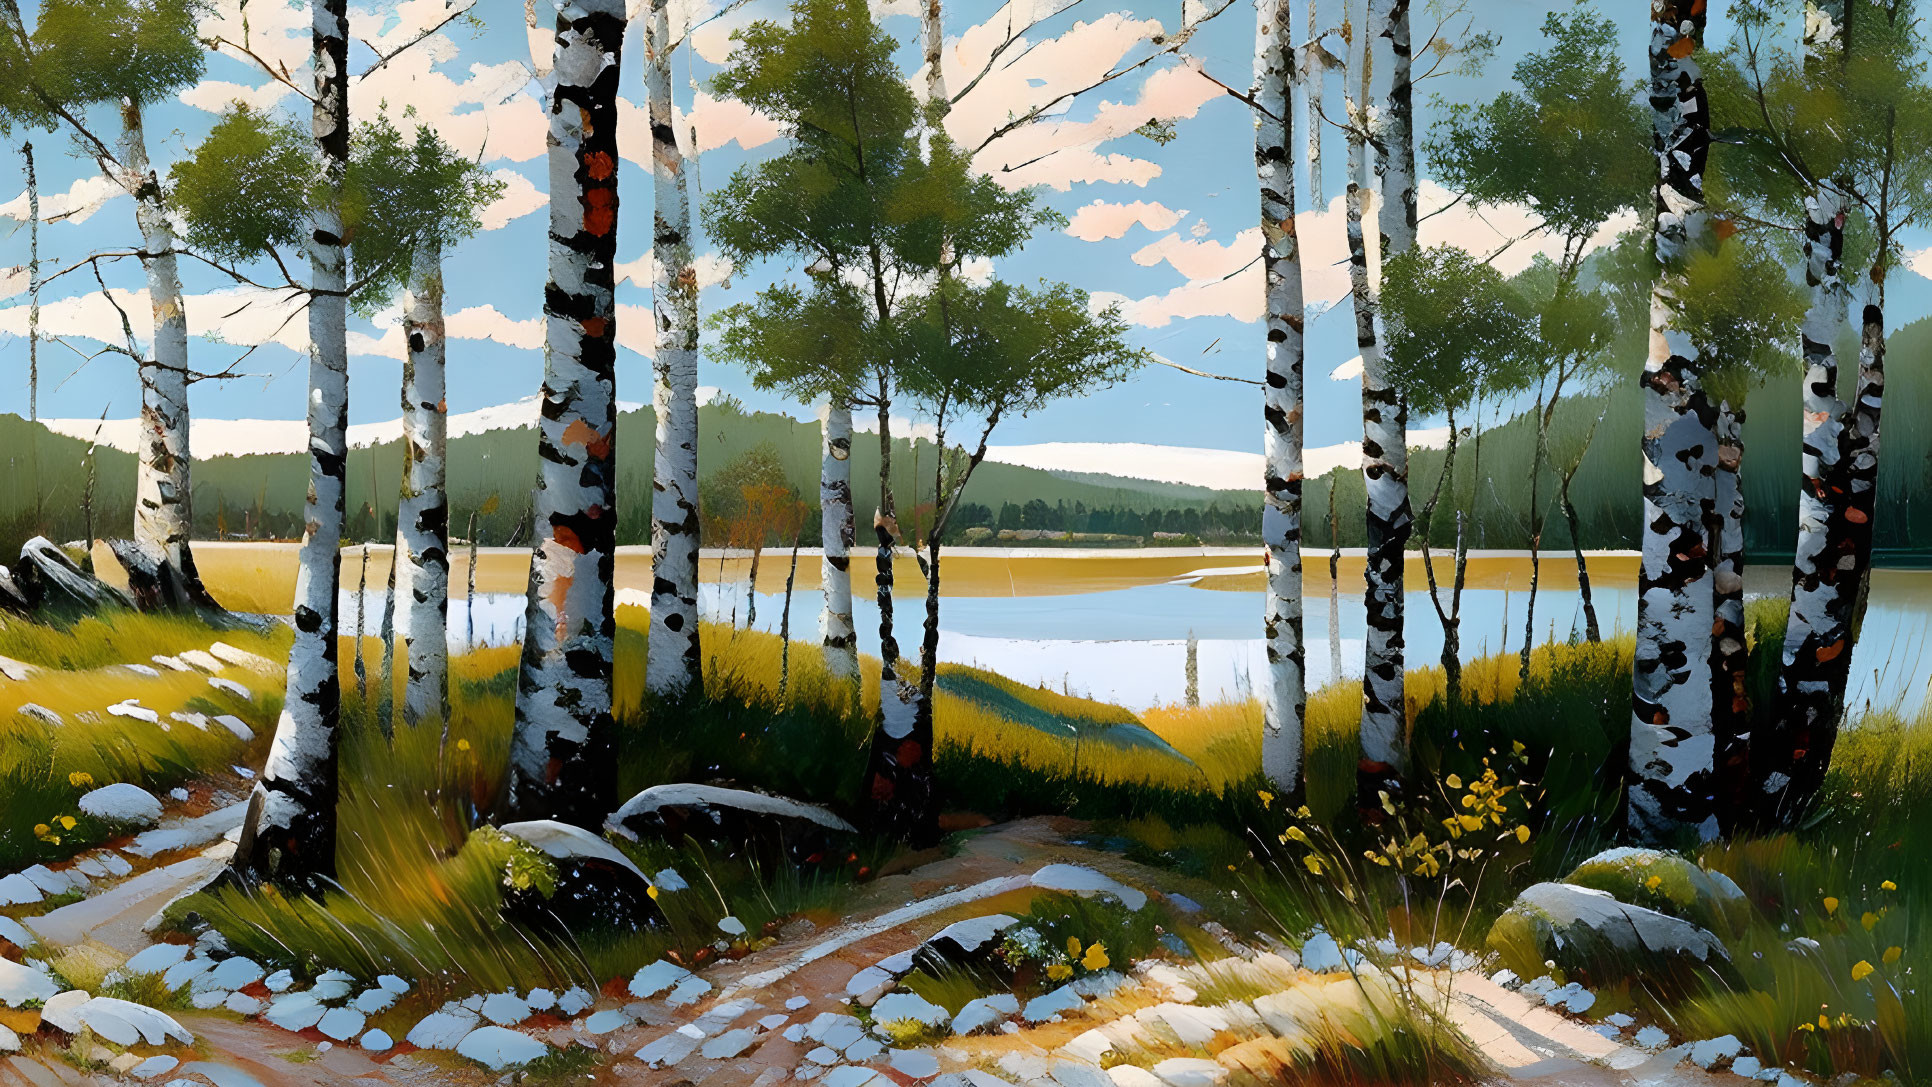 Tranquil landscape painting with birch trees, lake, sky, grass, and path